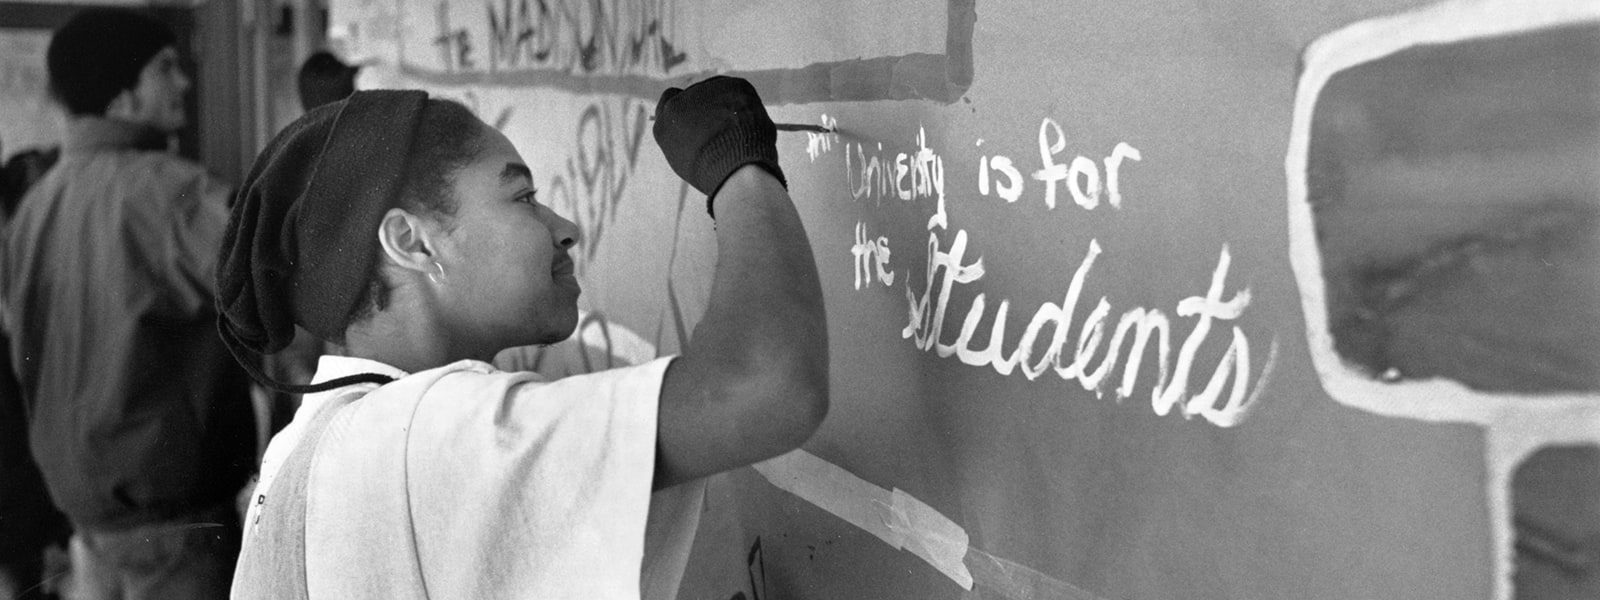 A student paints a message on a wall reading “the university is for the students”.